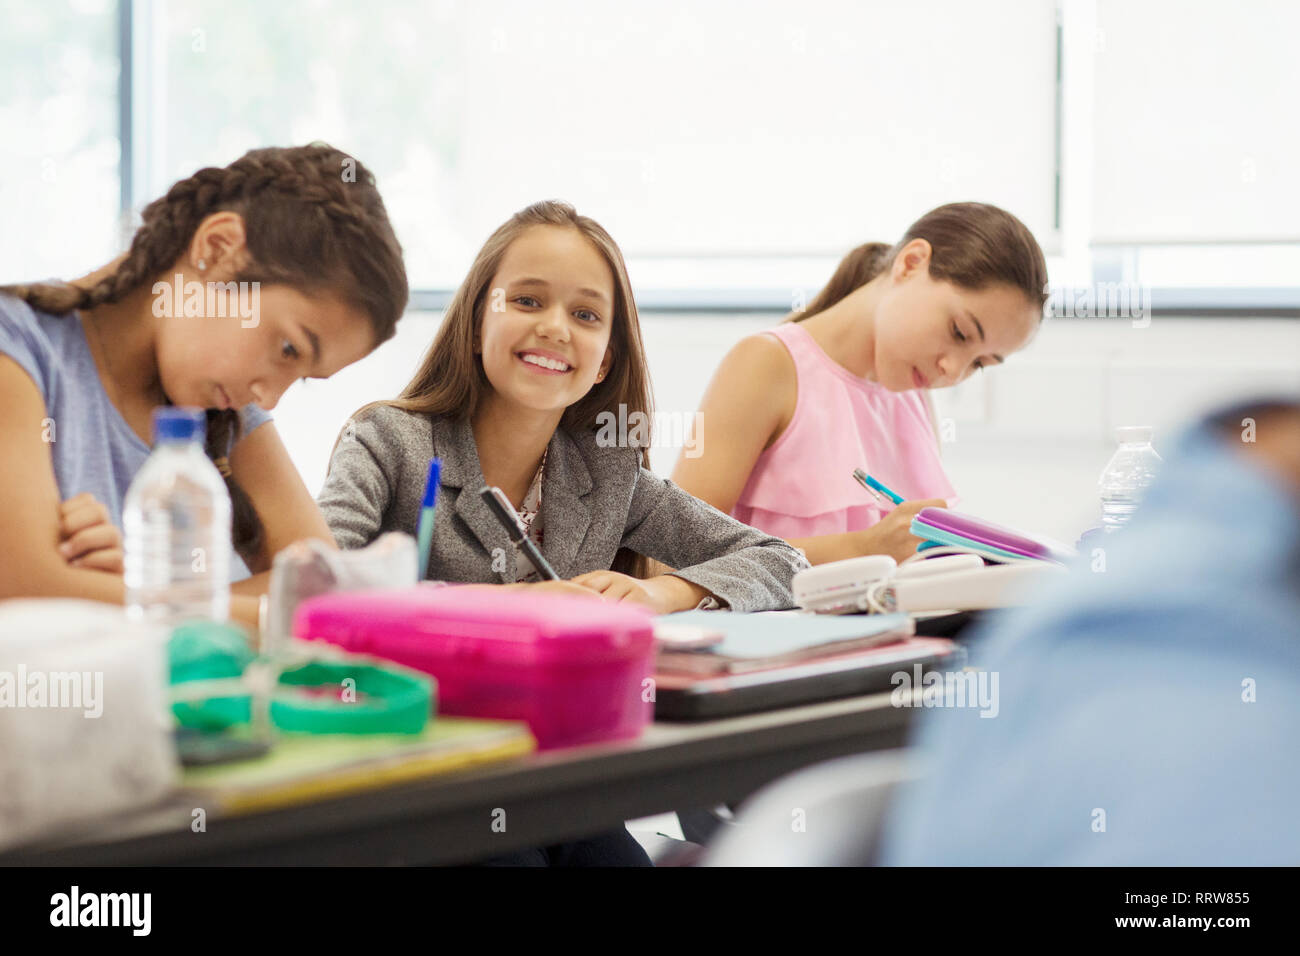 Portrait smiling, confident junior high school girl student studying in classroom Stock Photo